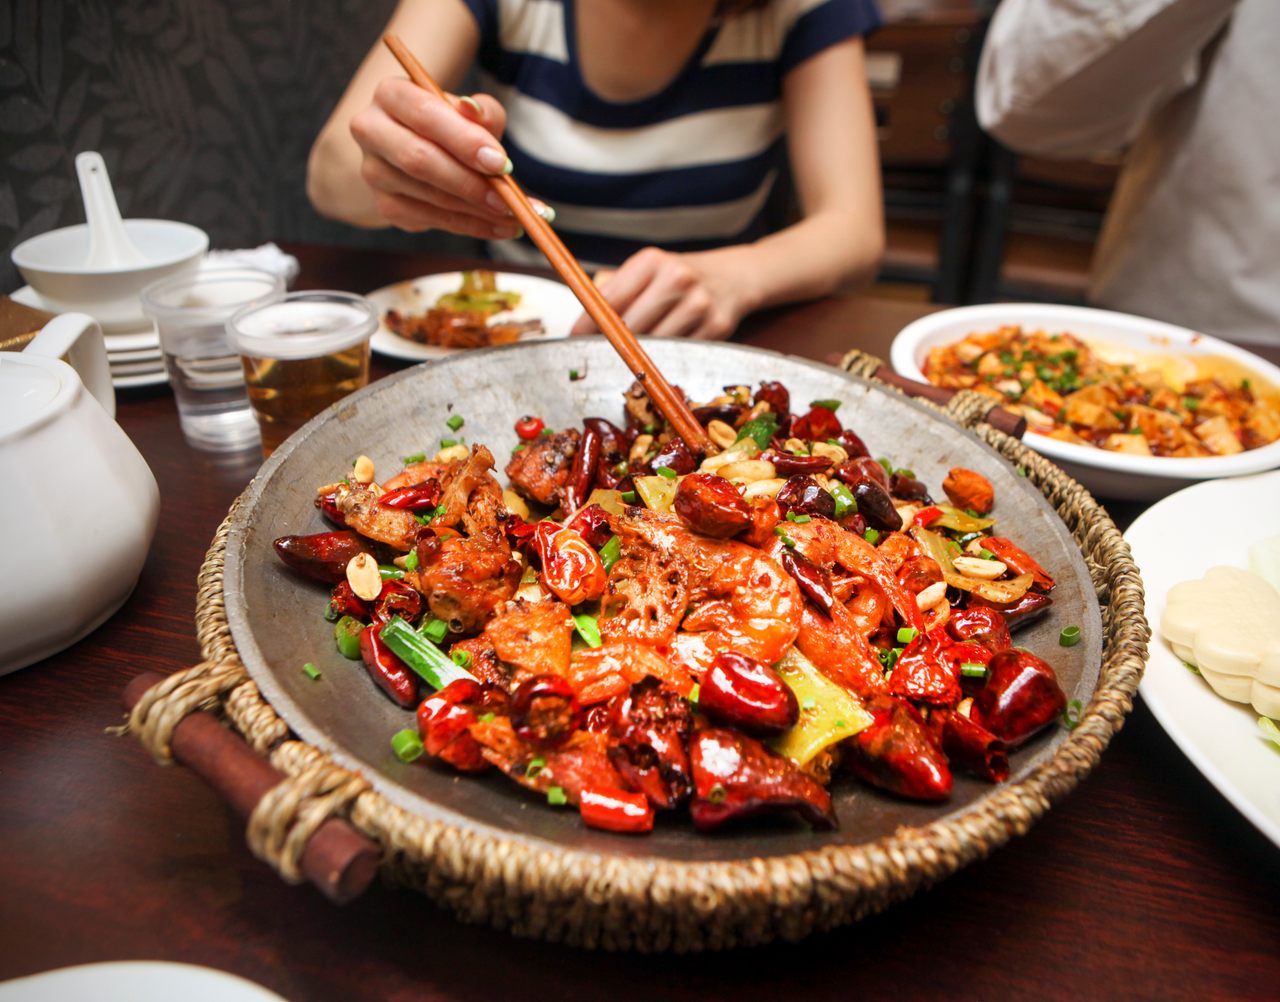 Does spicy food warm you up or cool you down?